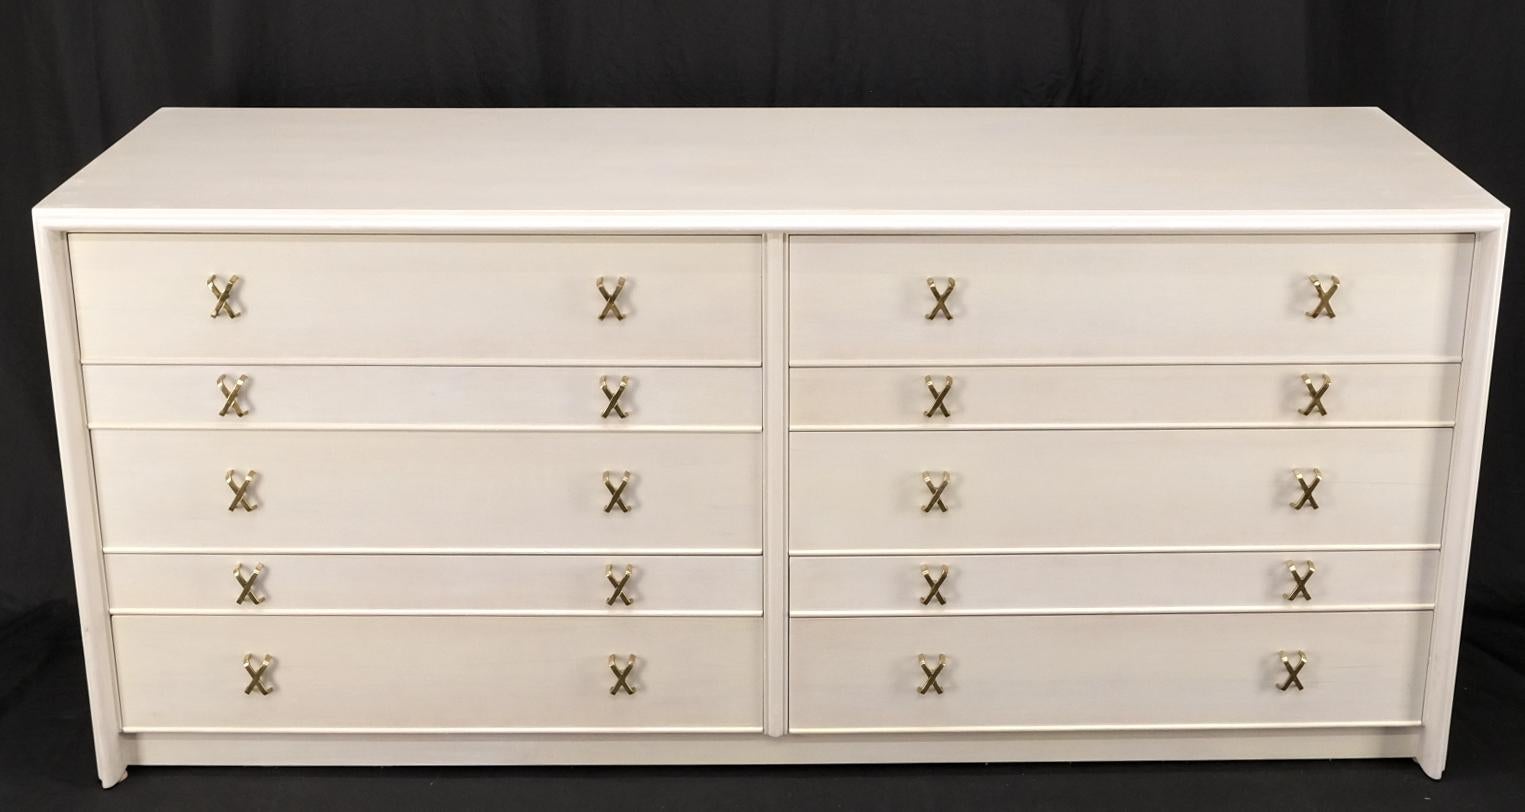 American Paul Frankl for Johnson White Wash Marble Top 10 Drawers Dresser Brass x Pulls For Sale